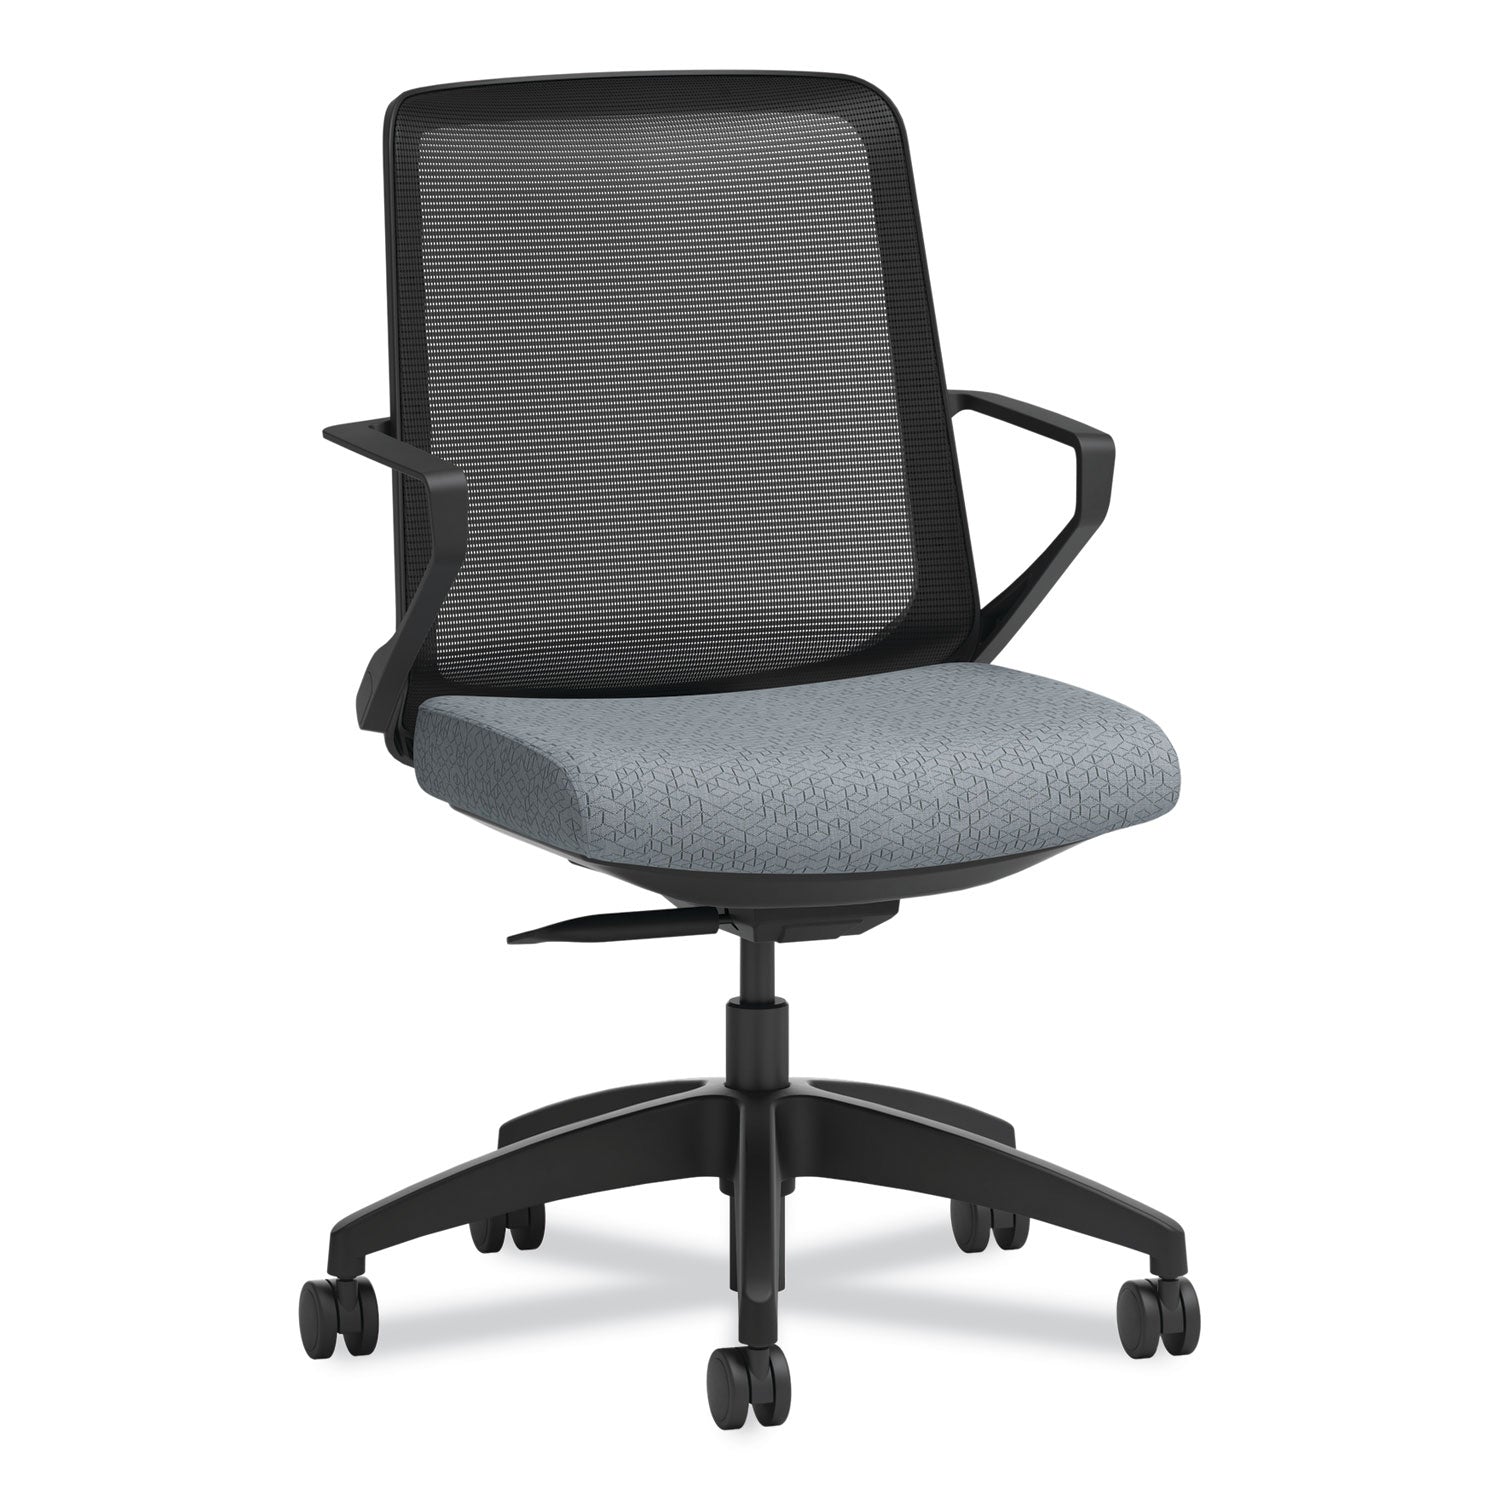 cliq-office-chair-supports-up-to-300-lb-17-to-22-seat-height-basalt-seat-black-back-base-ships-in-7-10-business-days_honclqimapx25t - 1